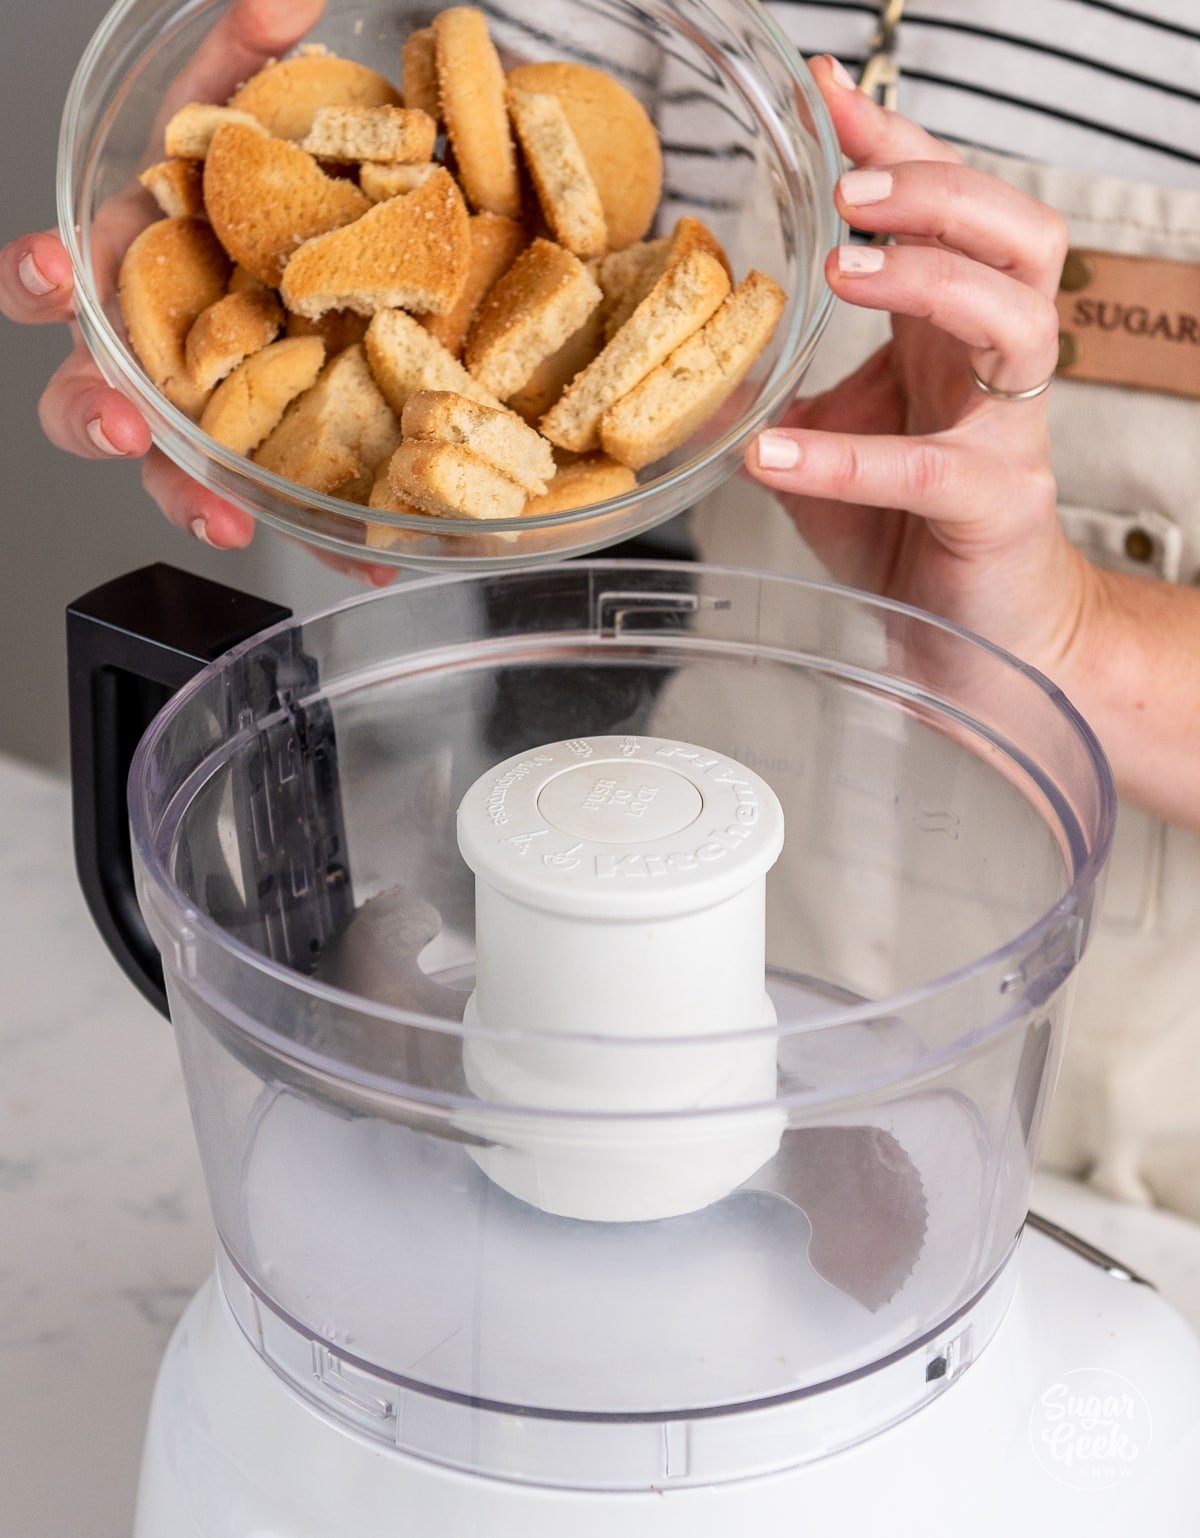 hands adding shortbread cookies to a food processor.